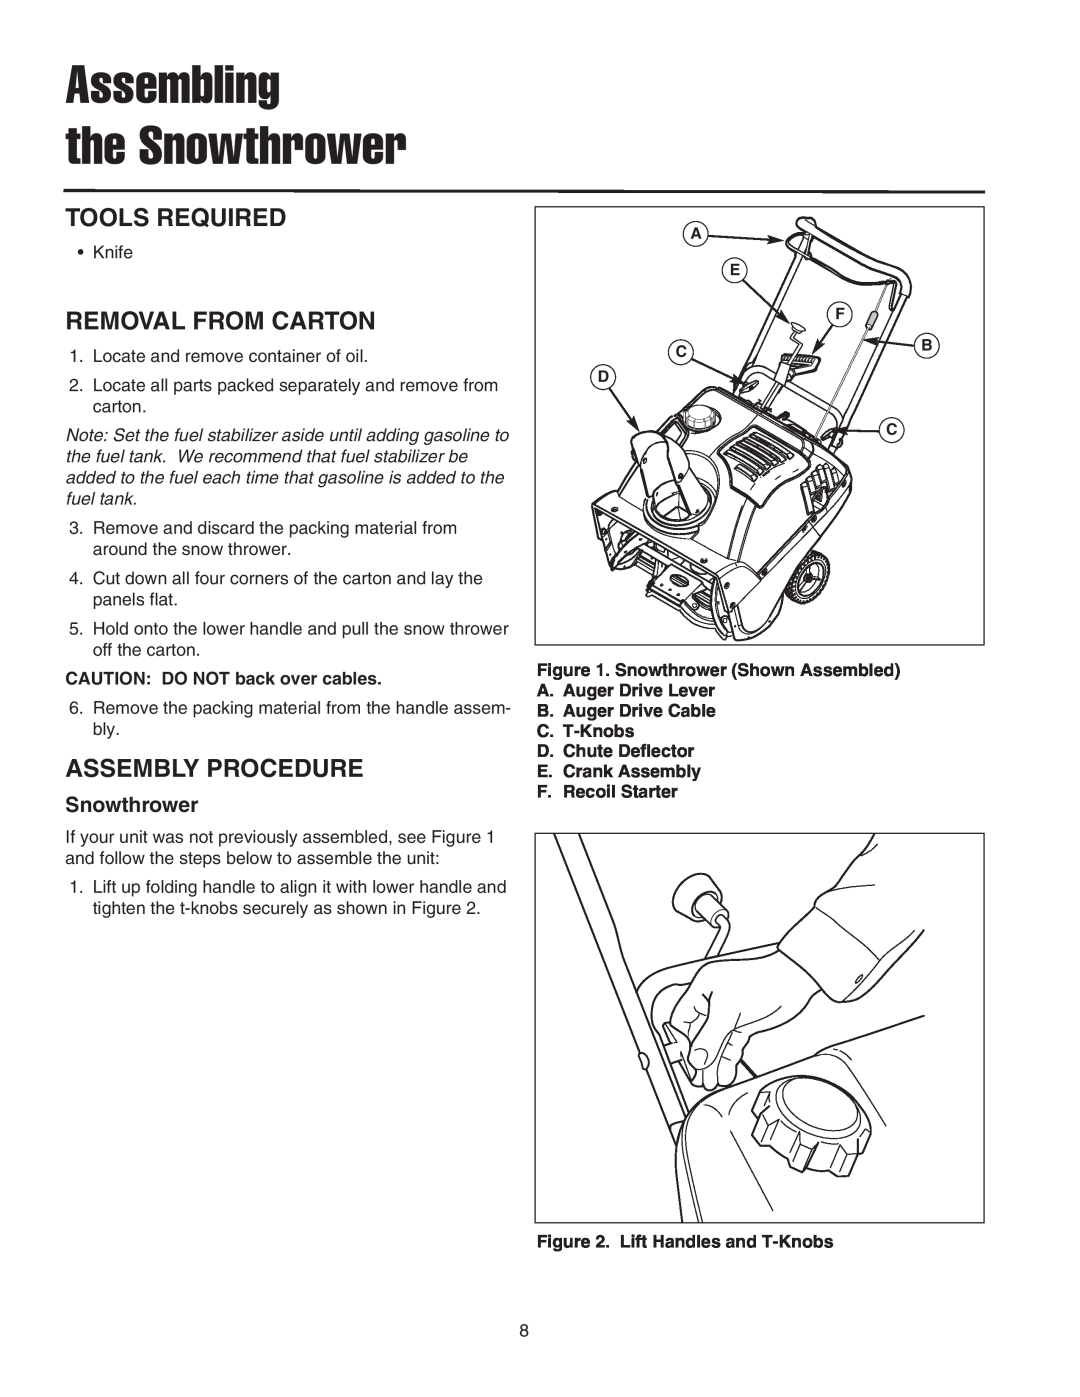 Snapper 522E manual Assembling the Snowthrower, Tools Required, Removal From Carton, Assembly Procedure, F. Recoil Starter 